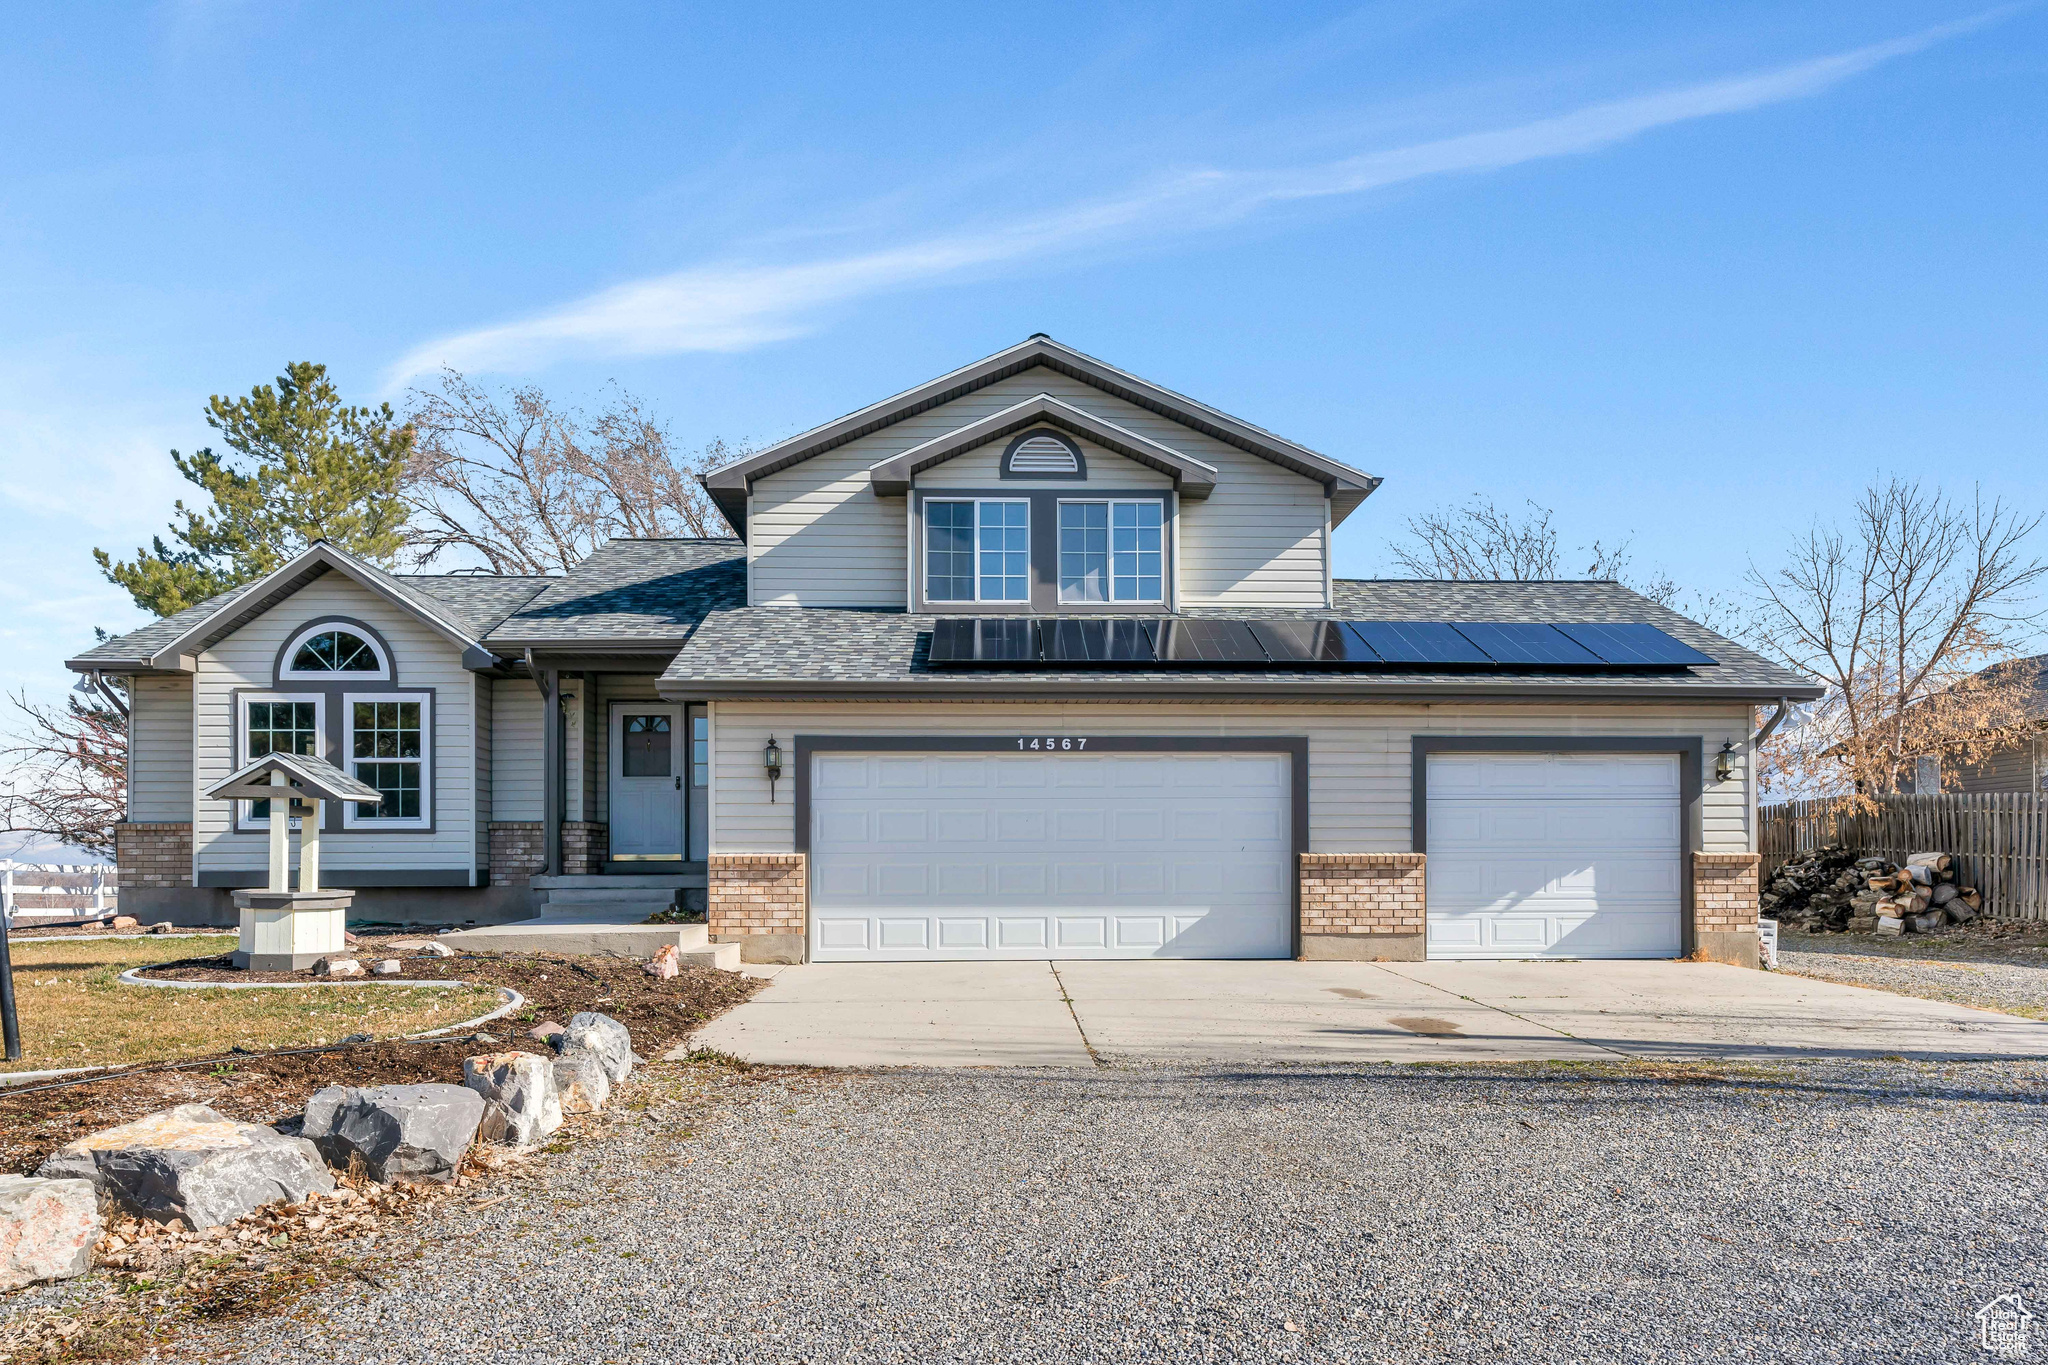 View of front of property featuring solar panels and a garage